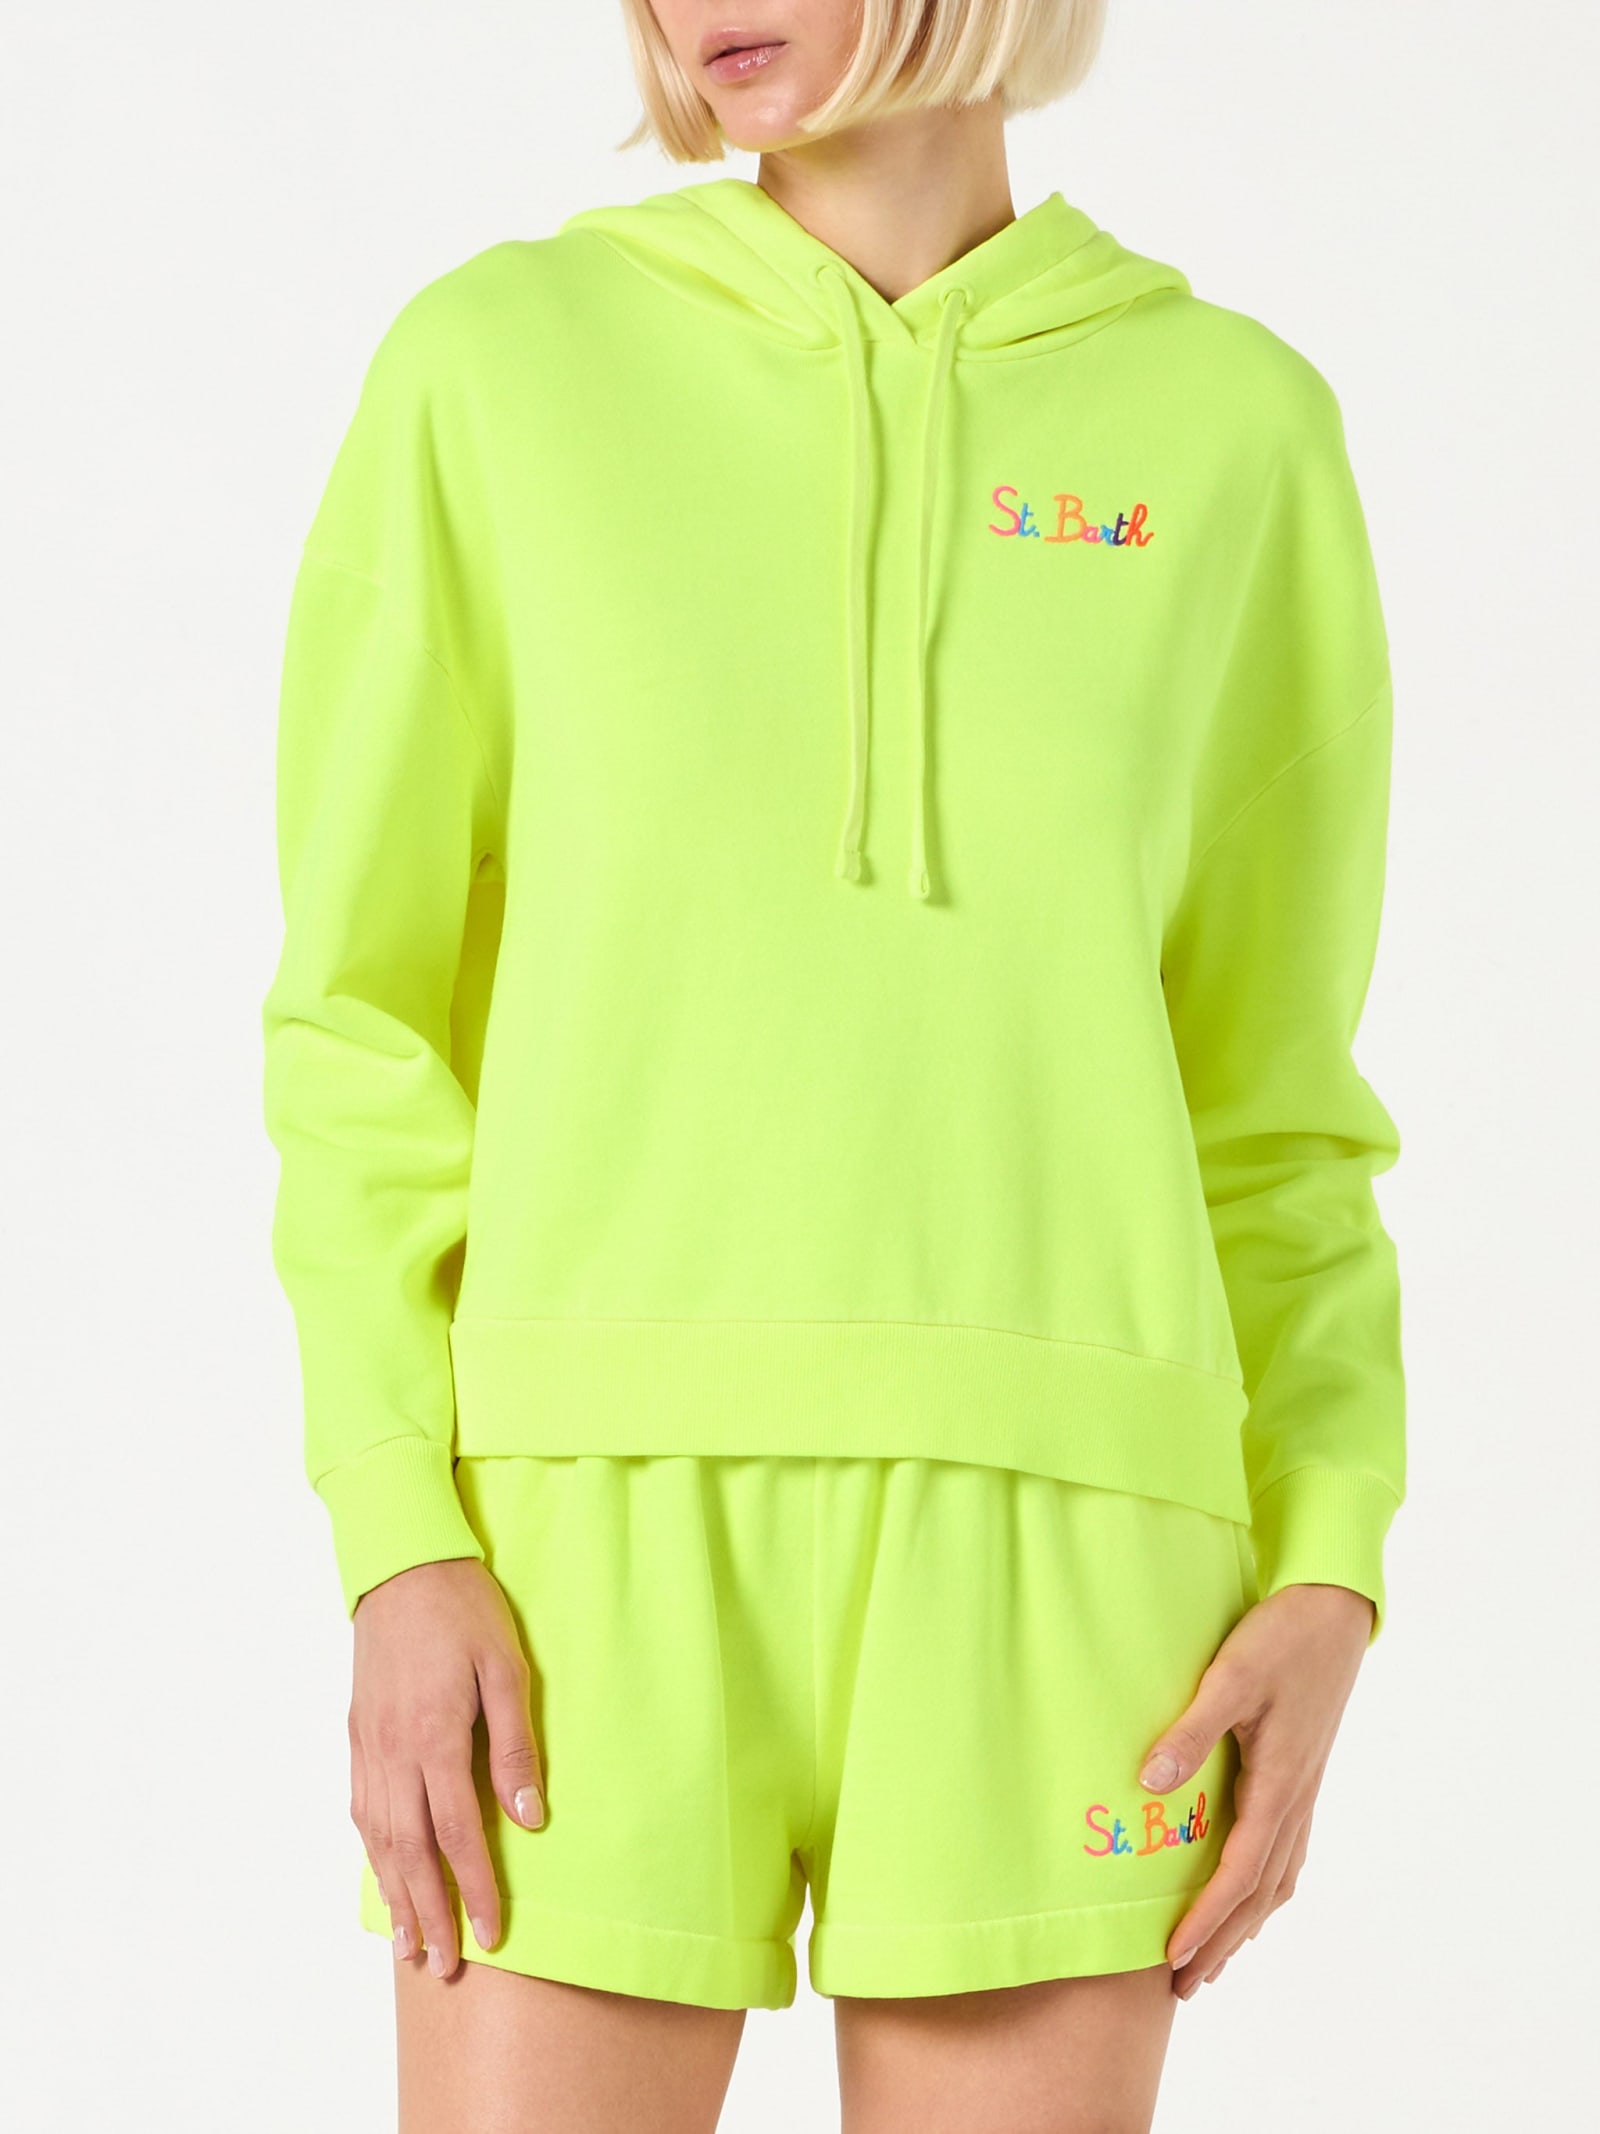 Fluo Yellow Hoodie With St. Barth Embroidery